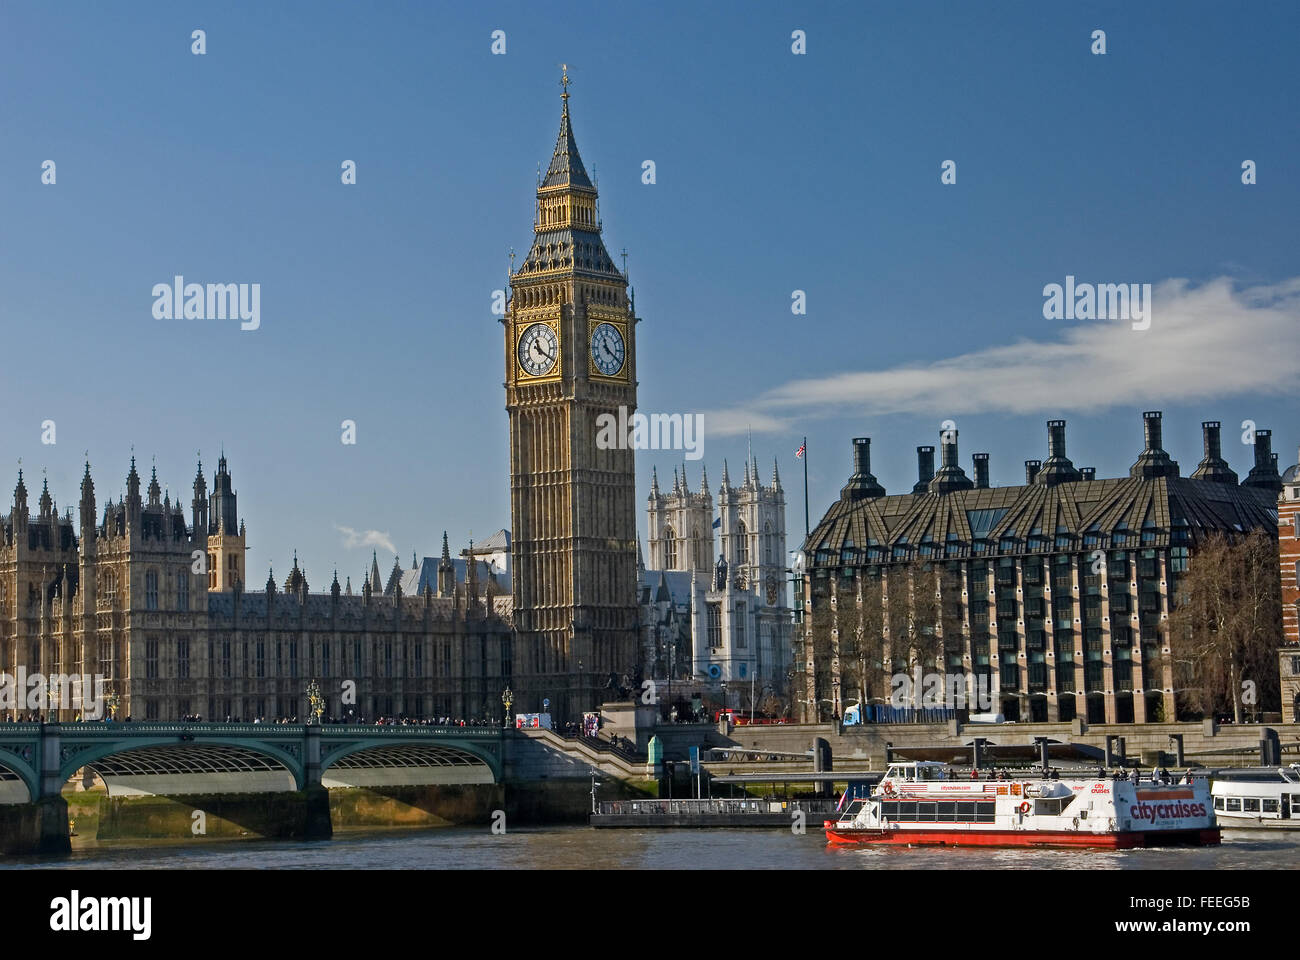 The iconic London landmark of Big Ben, part of the Palace of Westminster at the Houses of Parliament, stands at the end of Westminster Bridge, London Stock Photo